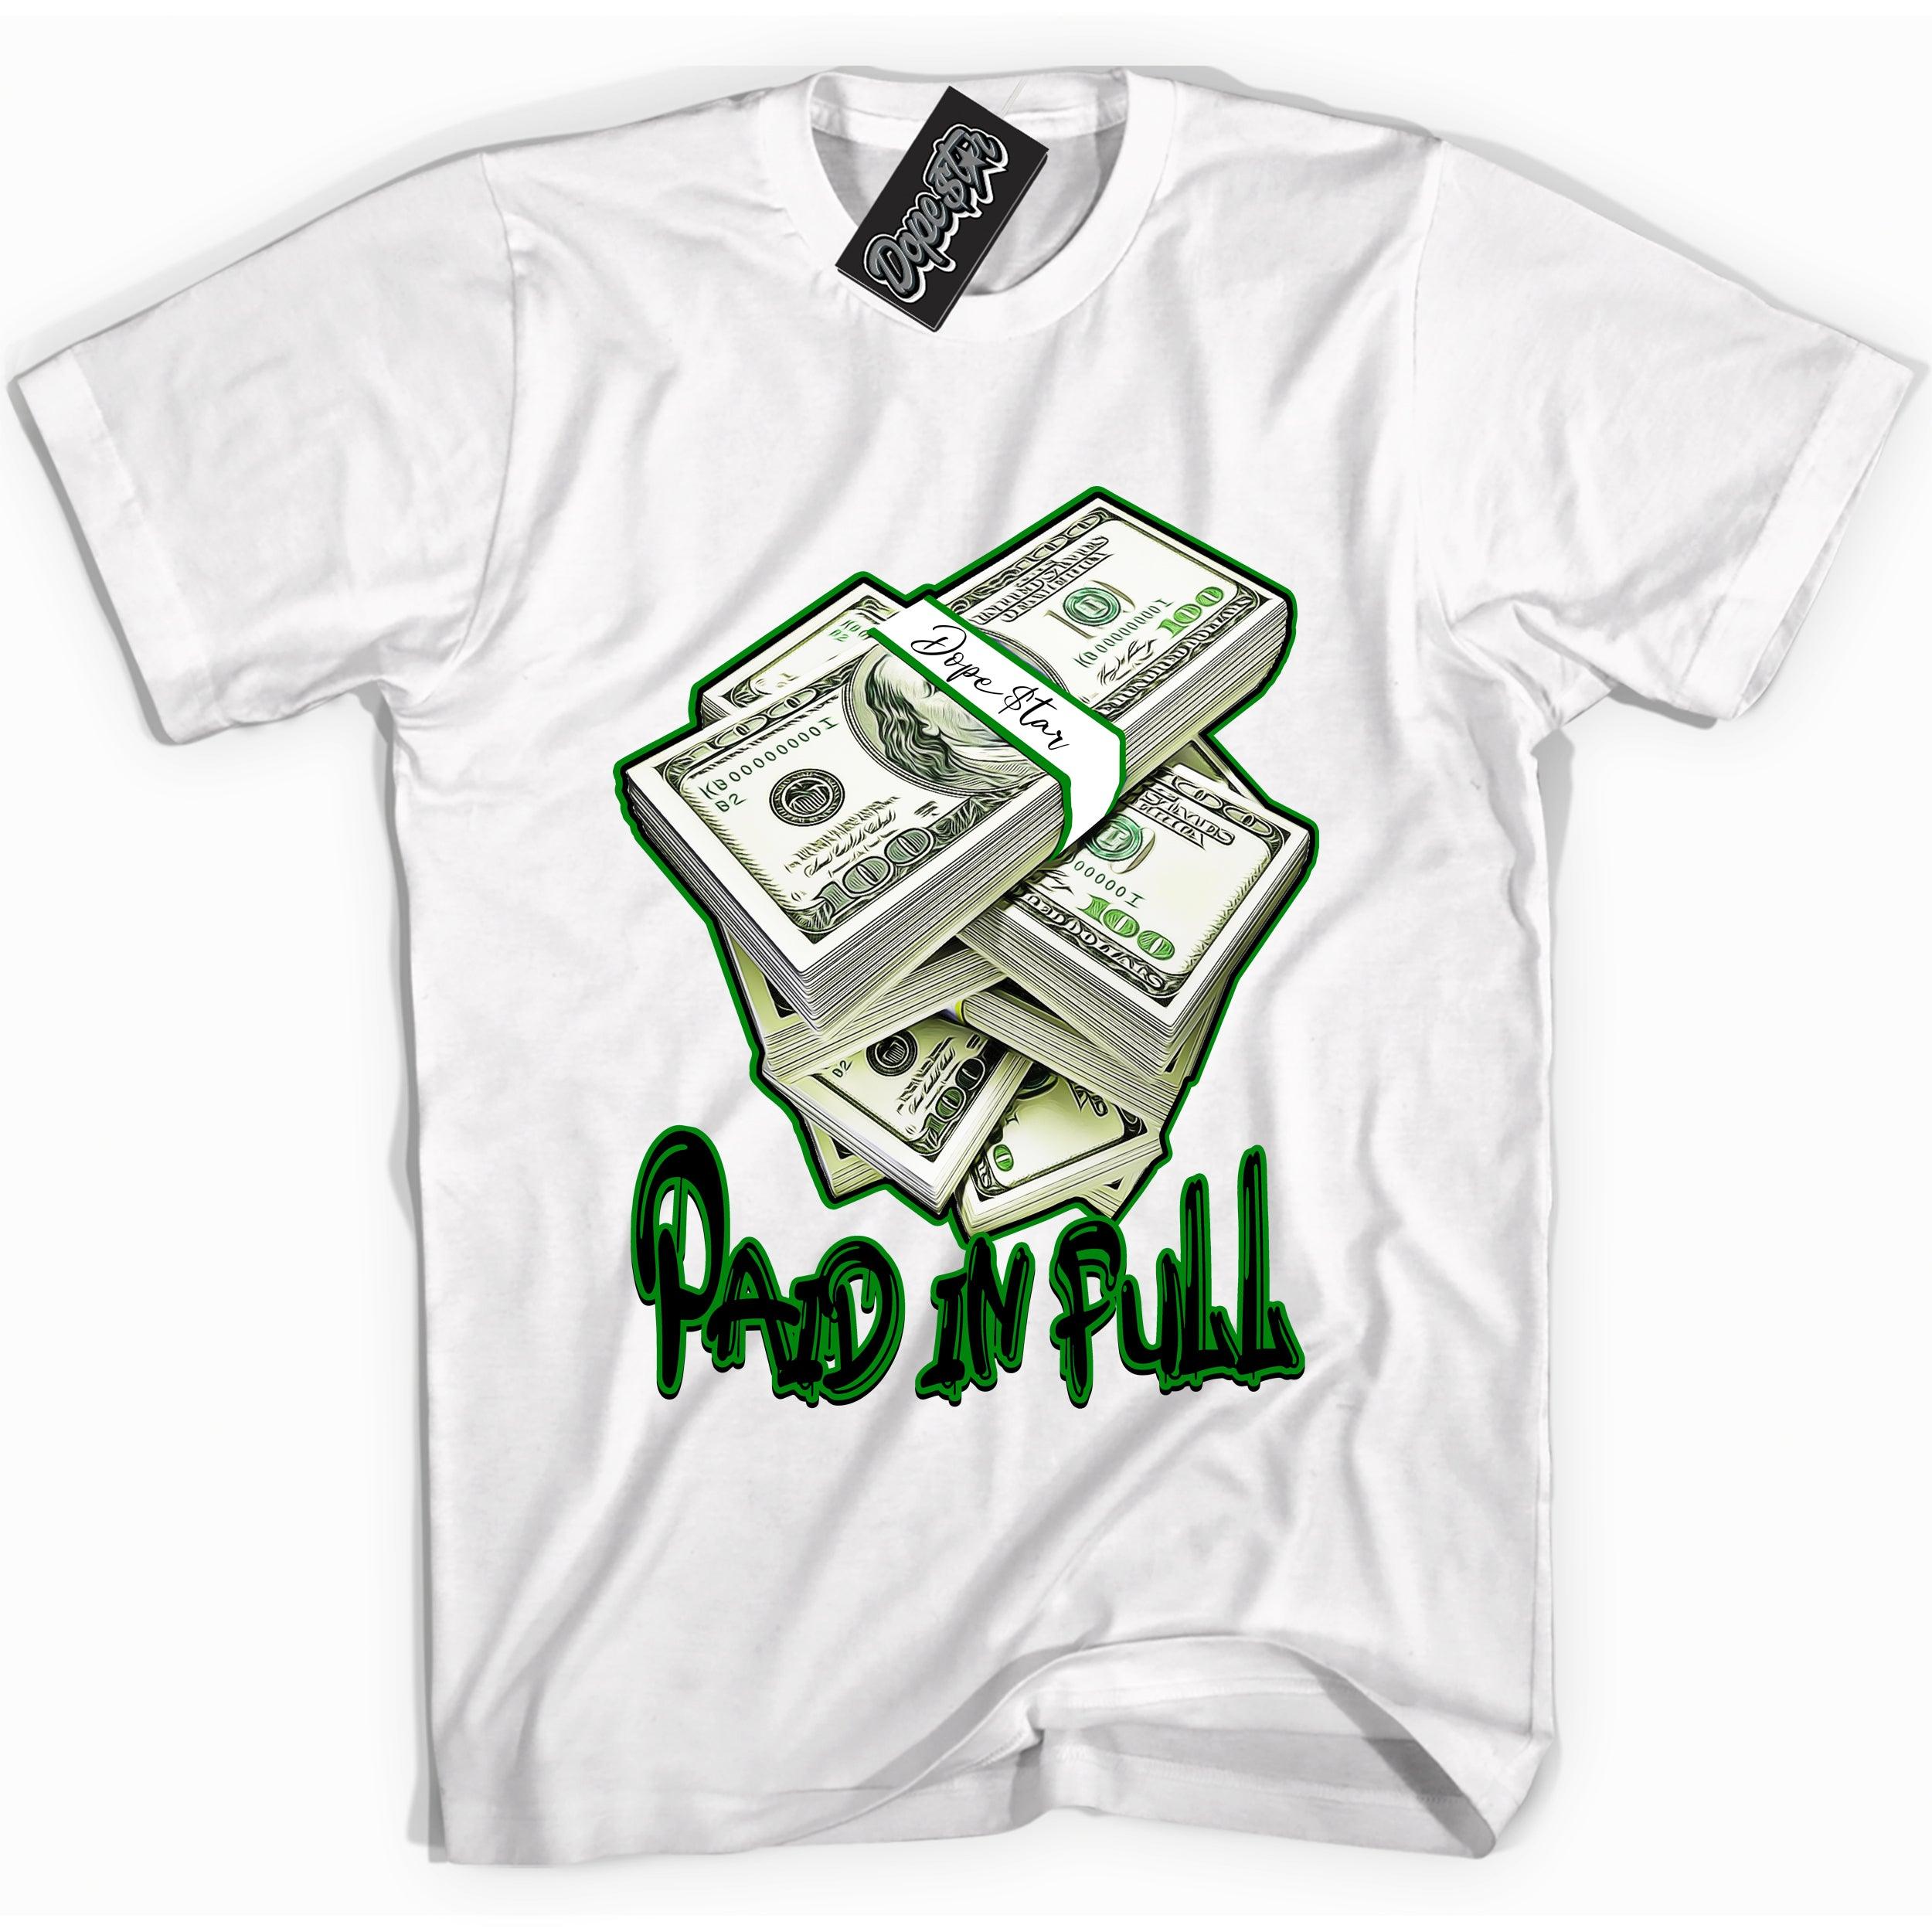 Air Jordan 1 Low Lucky Green Shirt - Paid In Full - Sneaker Shirts Outlet